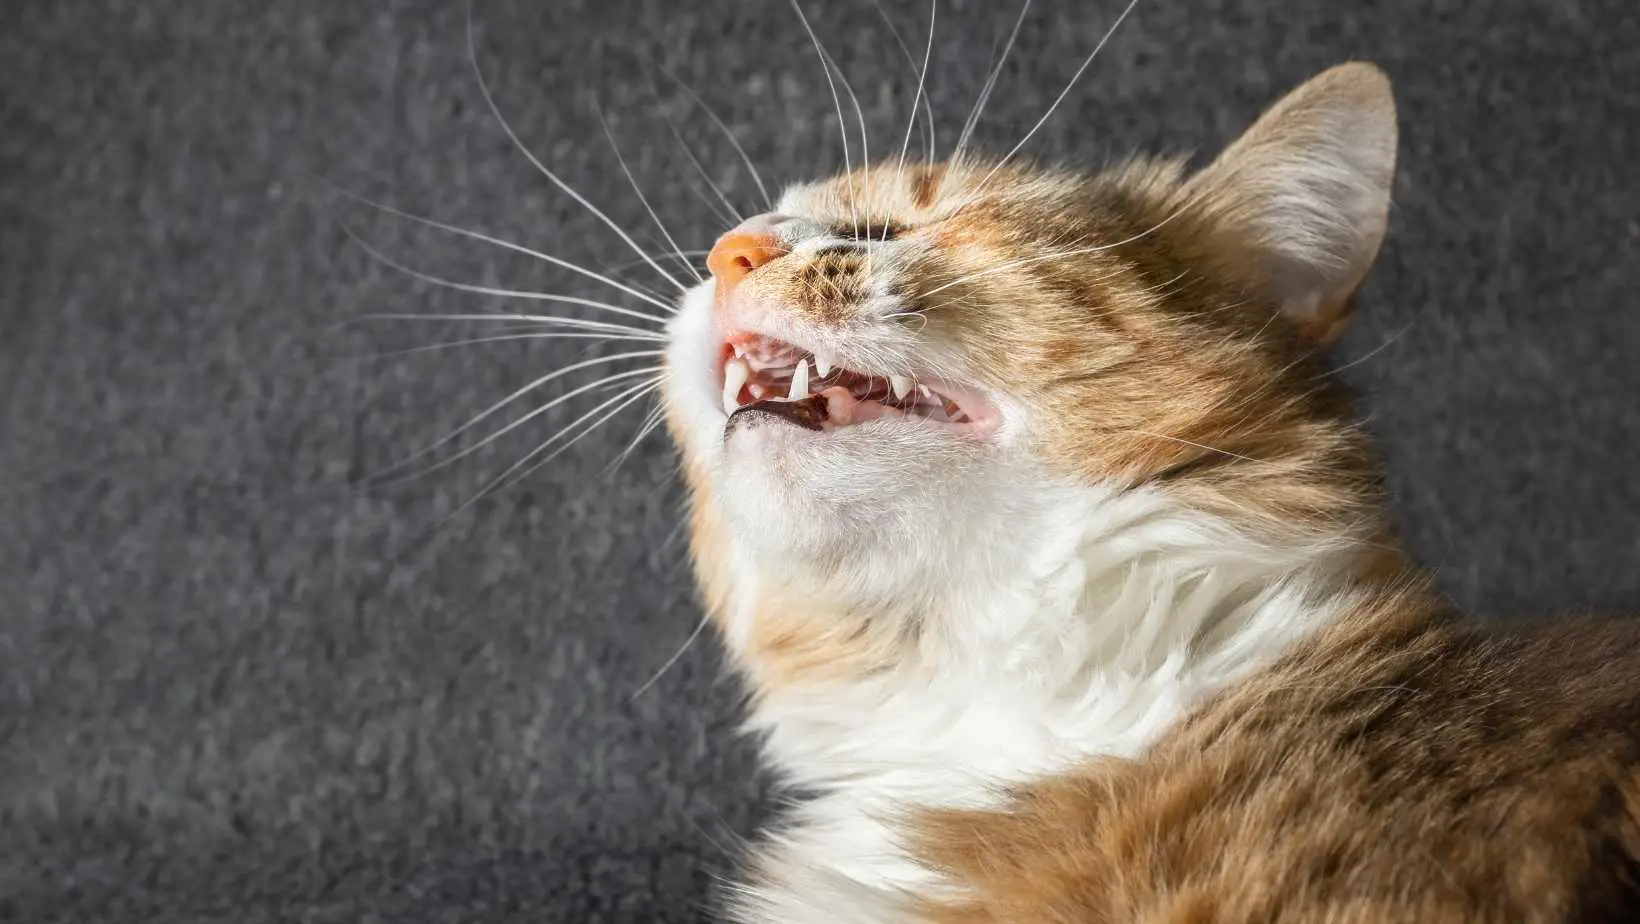 What can I give my cat for sneezing?